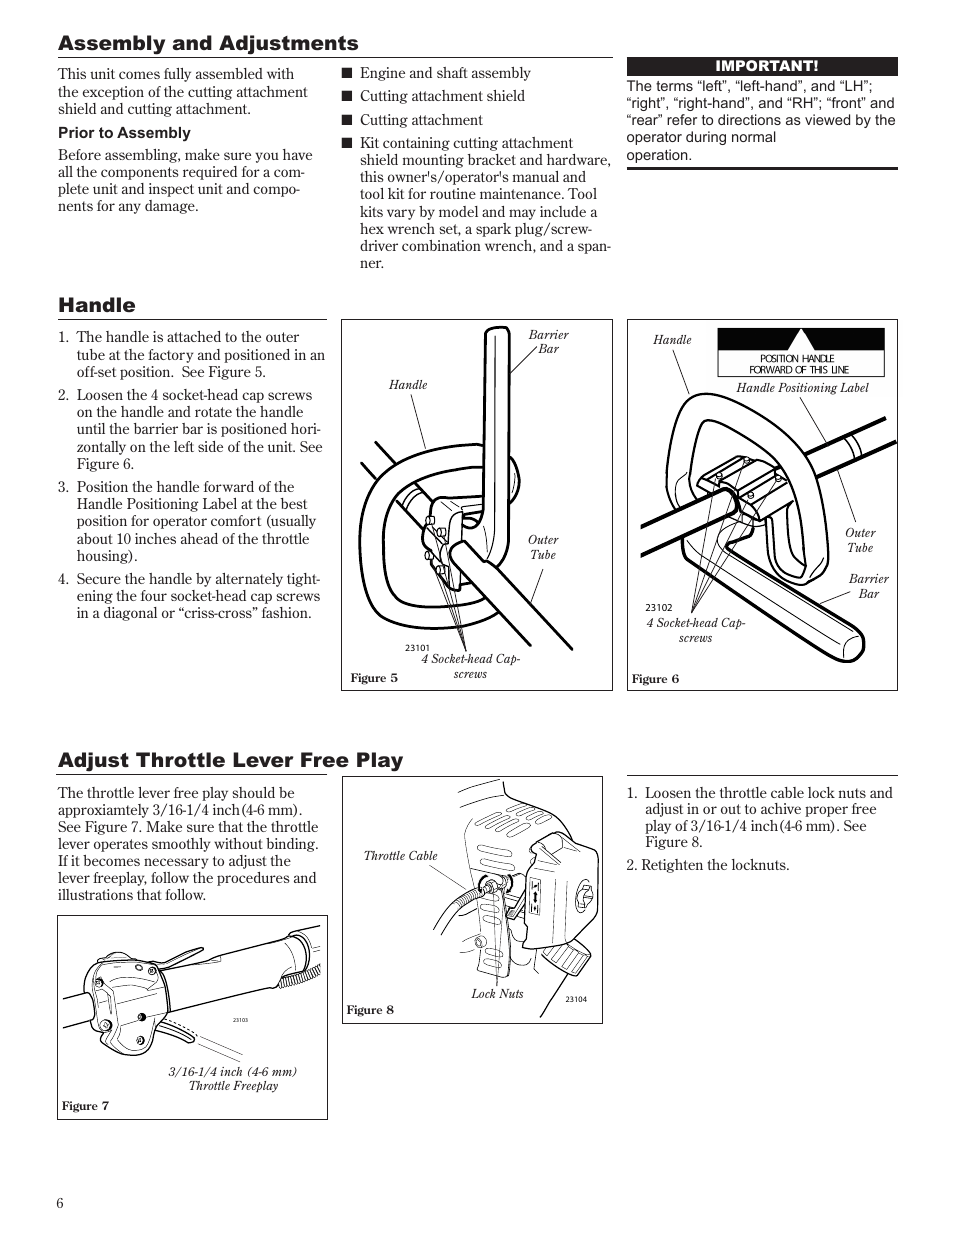 Adjust throttle lever free play, Assembly and adjustments, Handle | Shindaiwa 81642 User Manual | Page 6 / 40